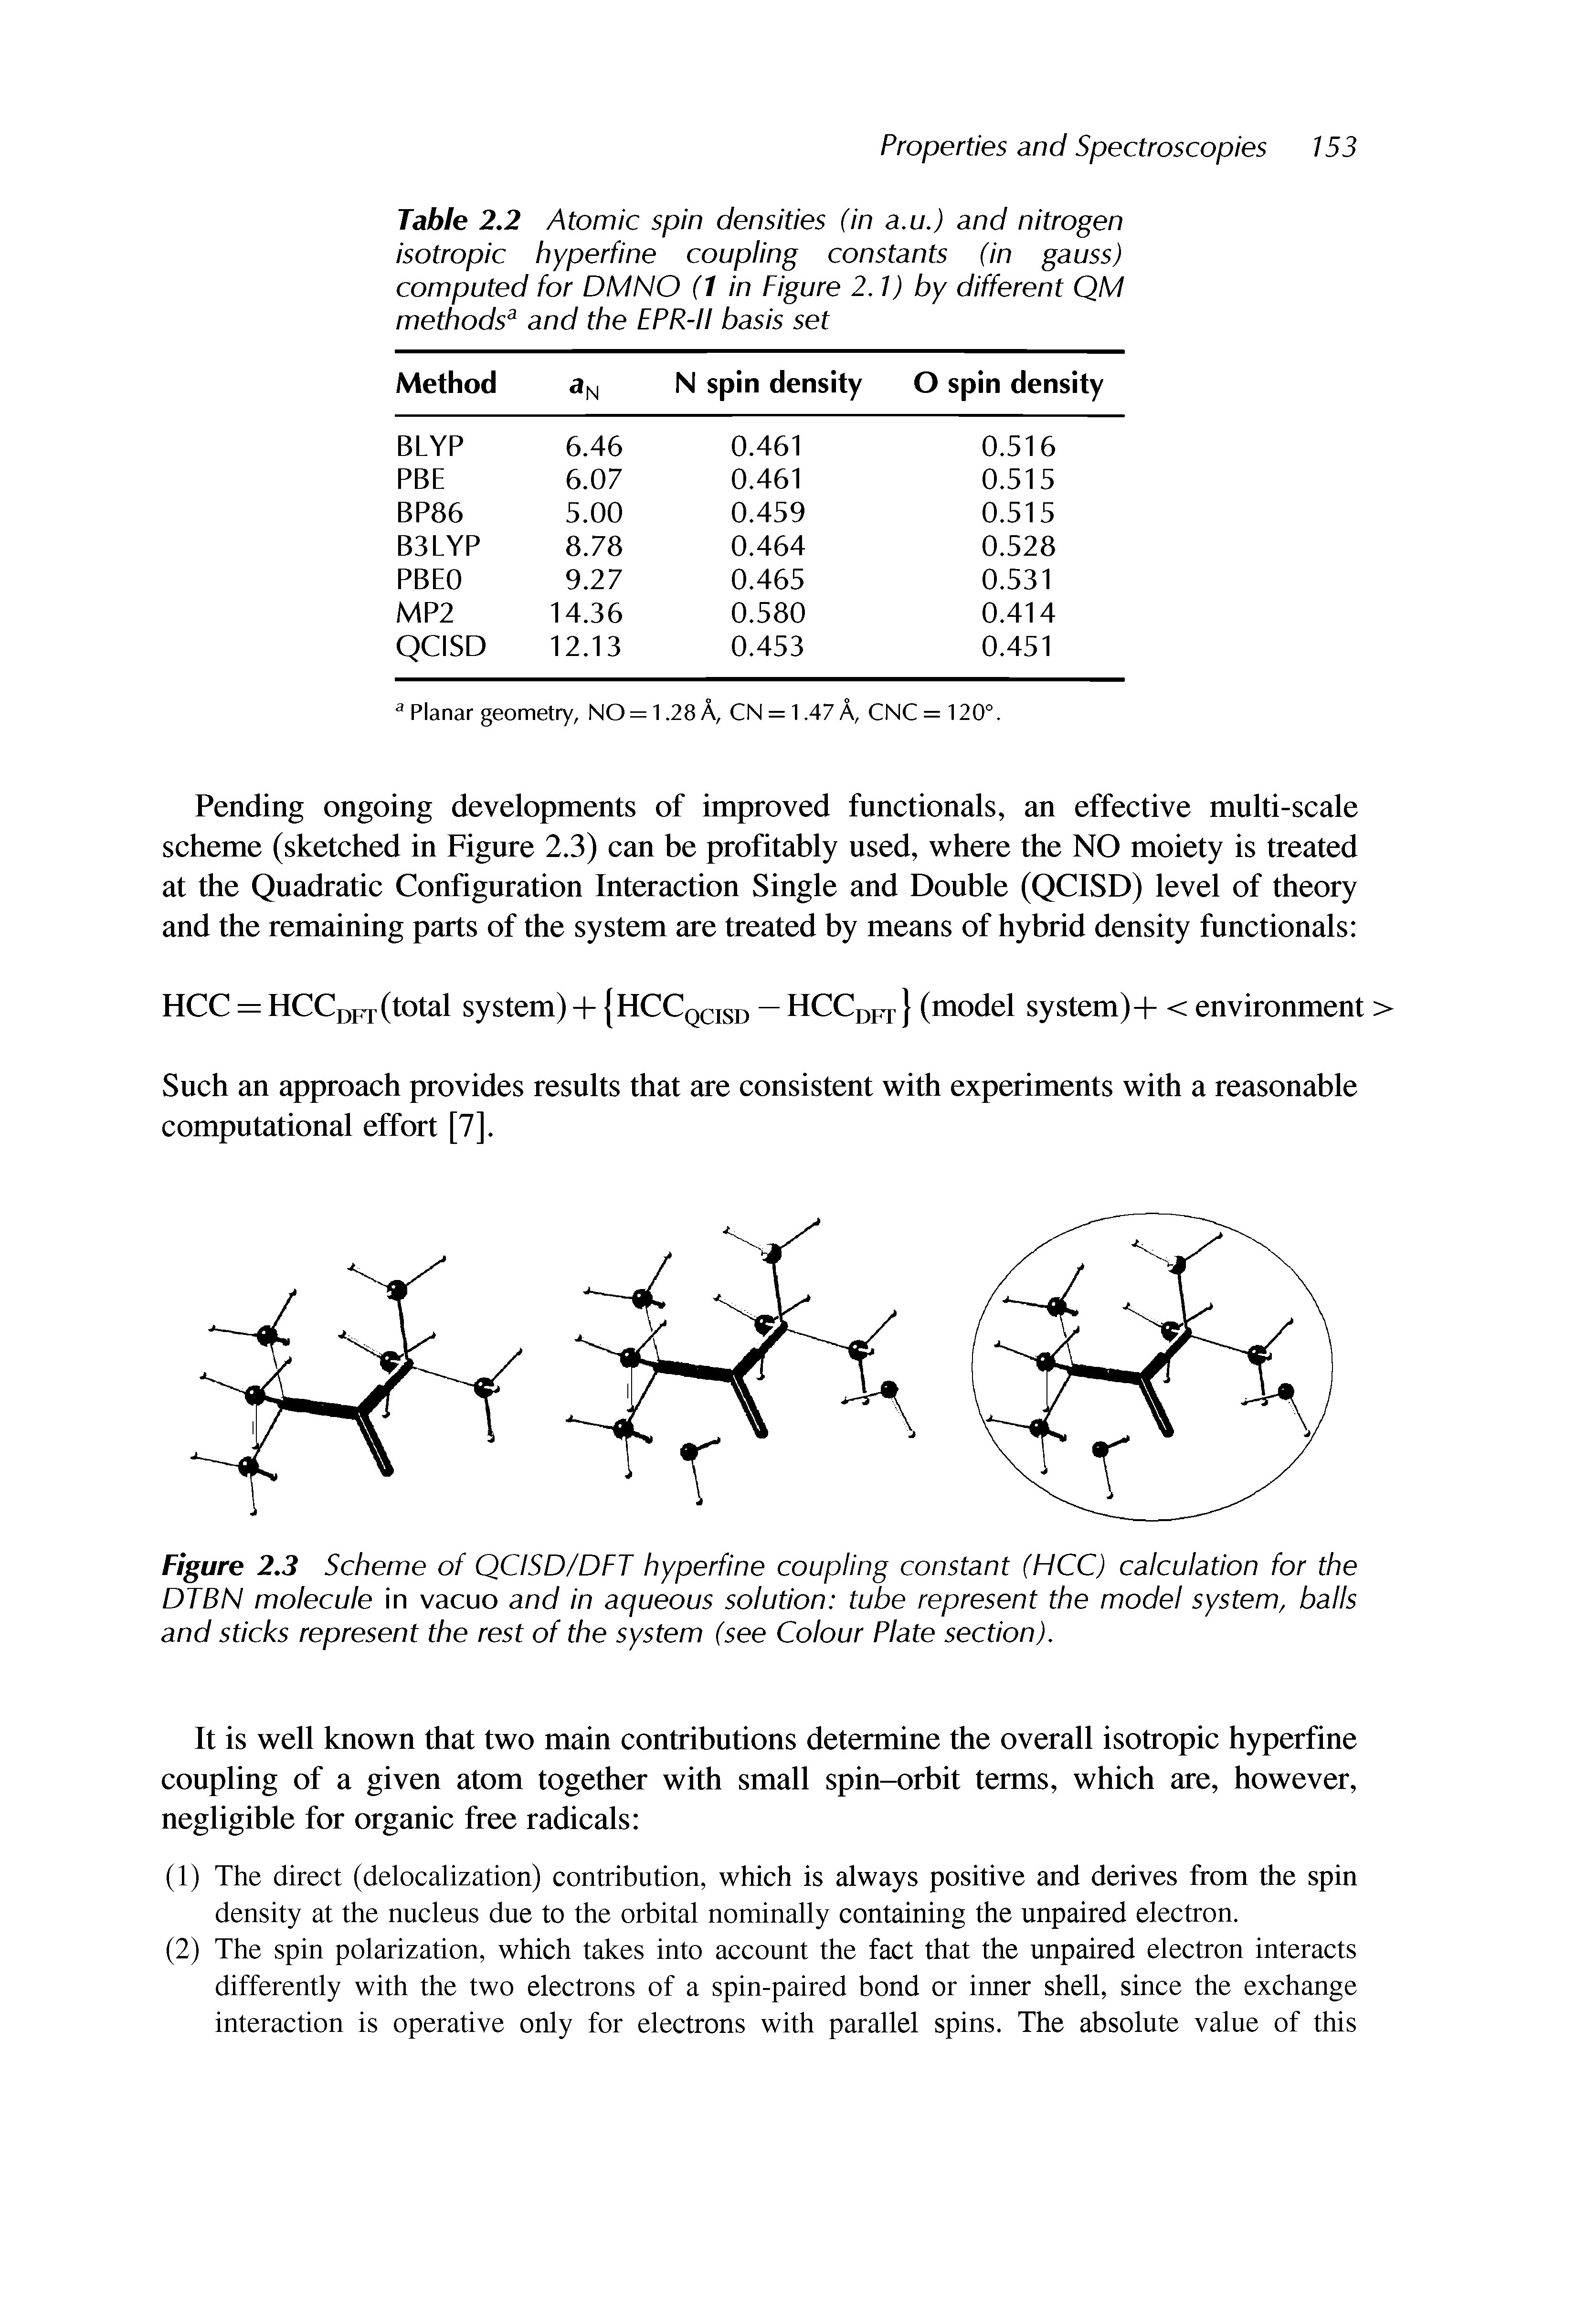 Table 2.2 Atomic spin densities (in a.u.) and nitrogen isotropic hyperfine coupling constants (in gauss) computed for DM NO (1 in Figure 2.1) by different QM methodsa and the EPR-II basis set...